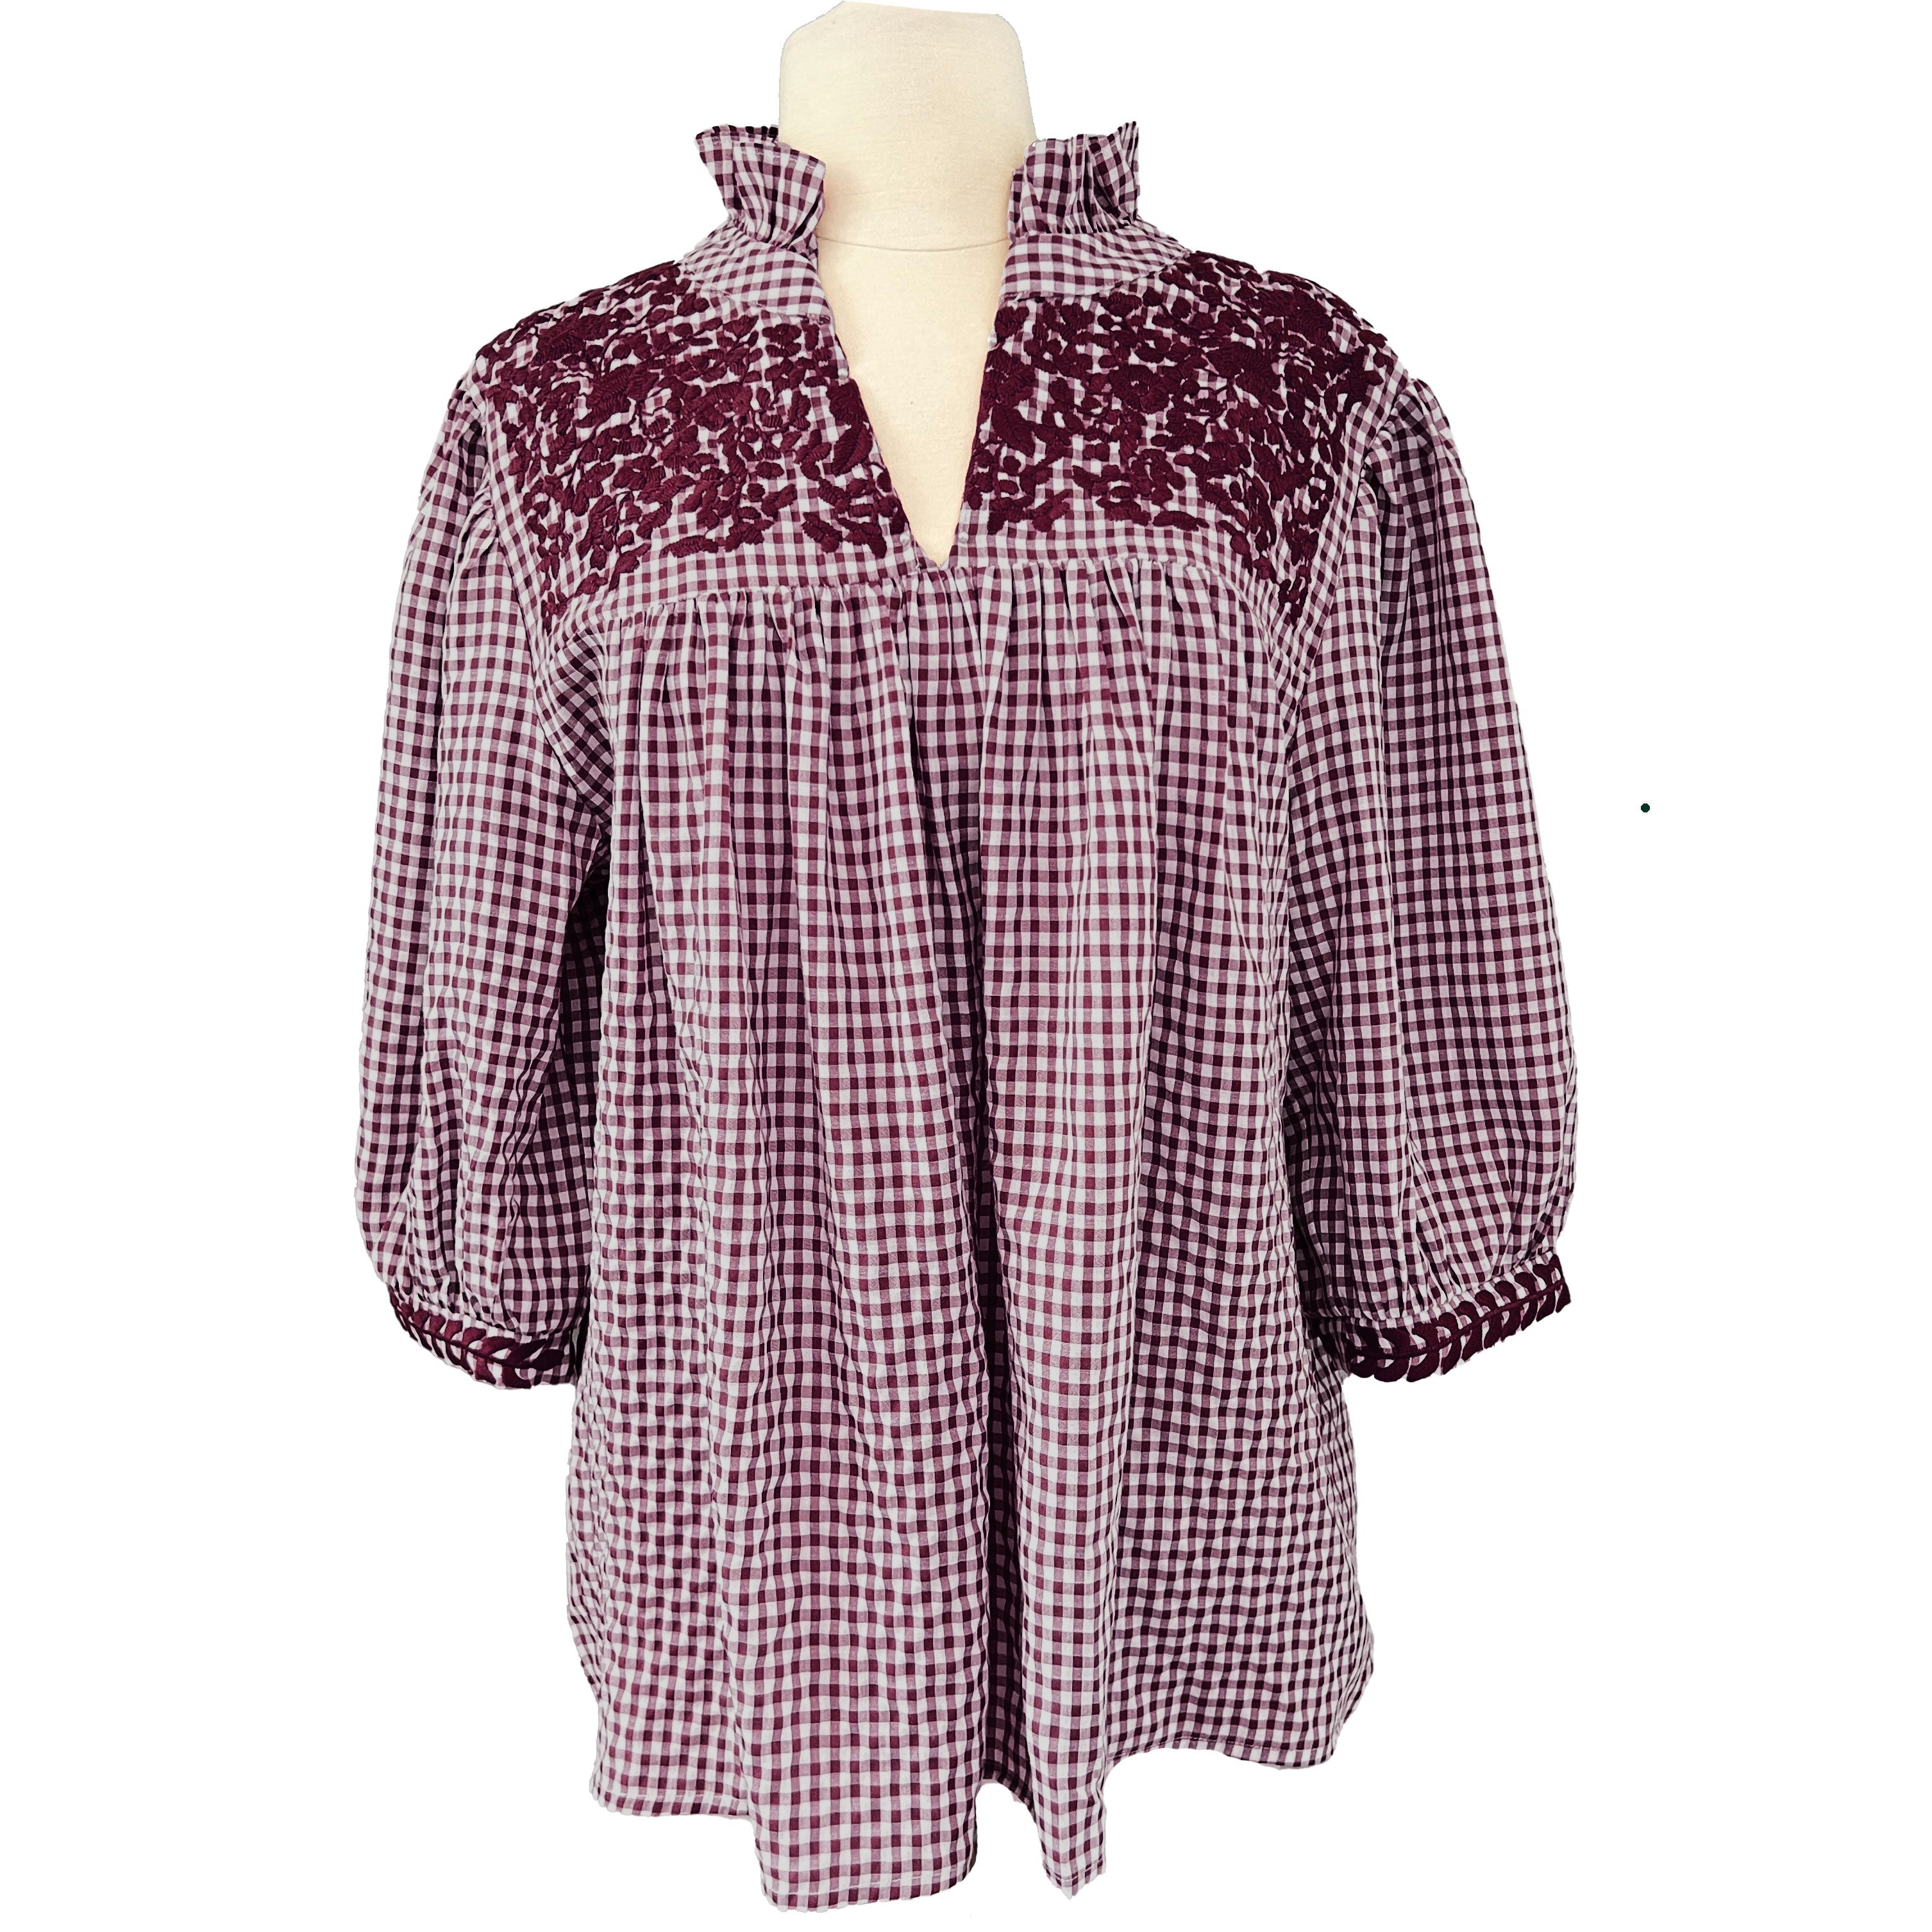 Aggie Gingham Tailgater Blouse (XL only) – SPIRIT DRESS